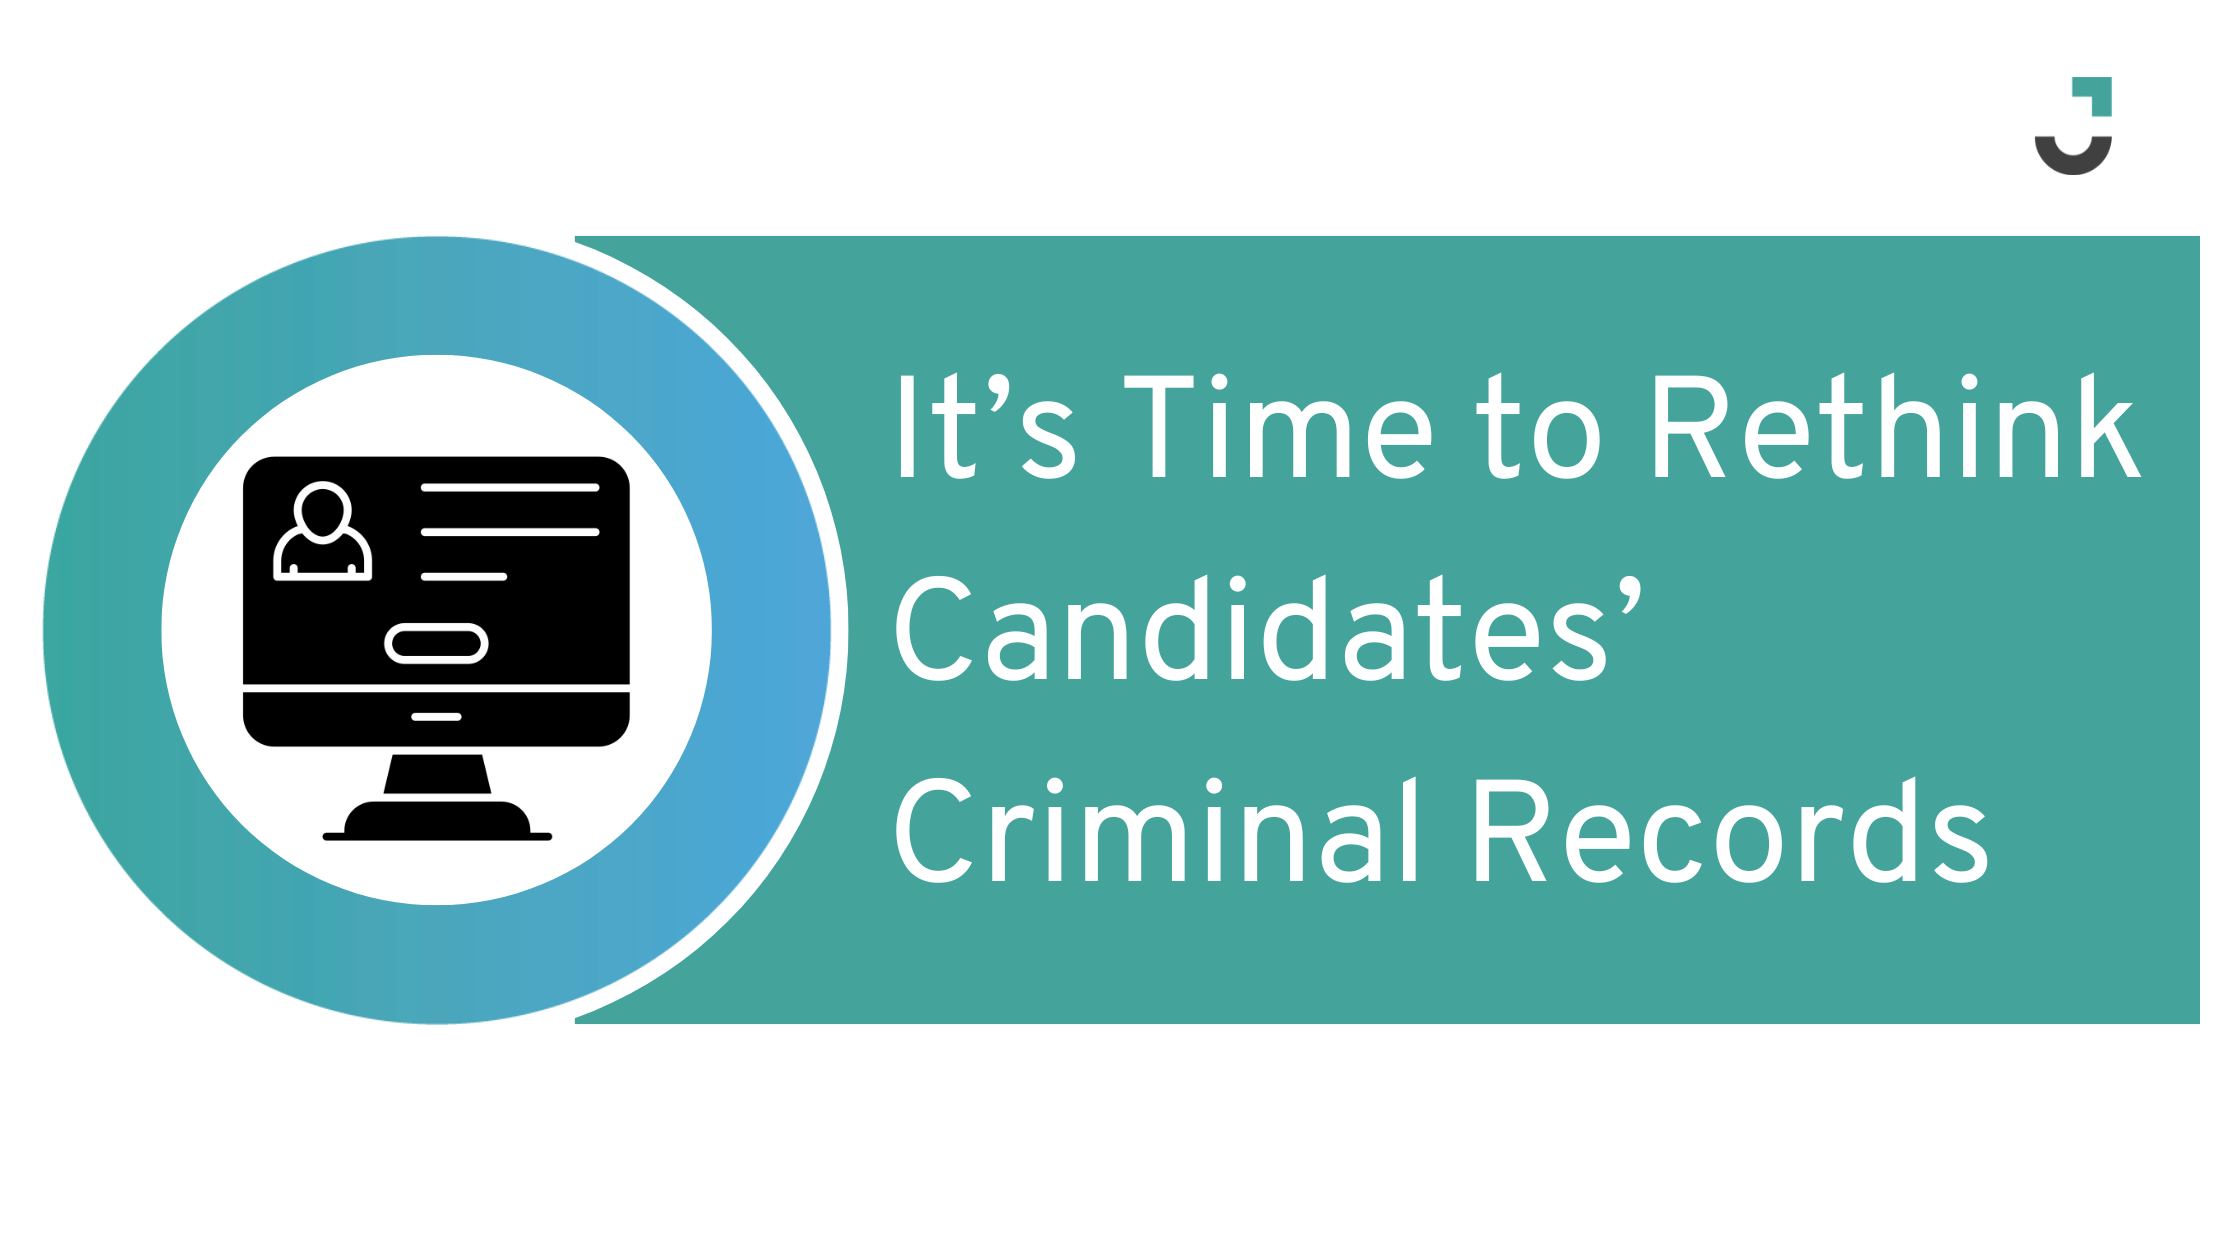 It’s Time to Rethink Candidates’ Criminal Records